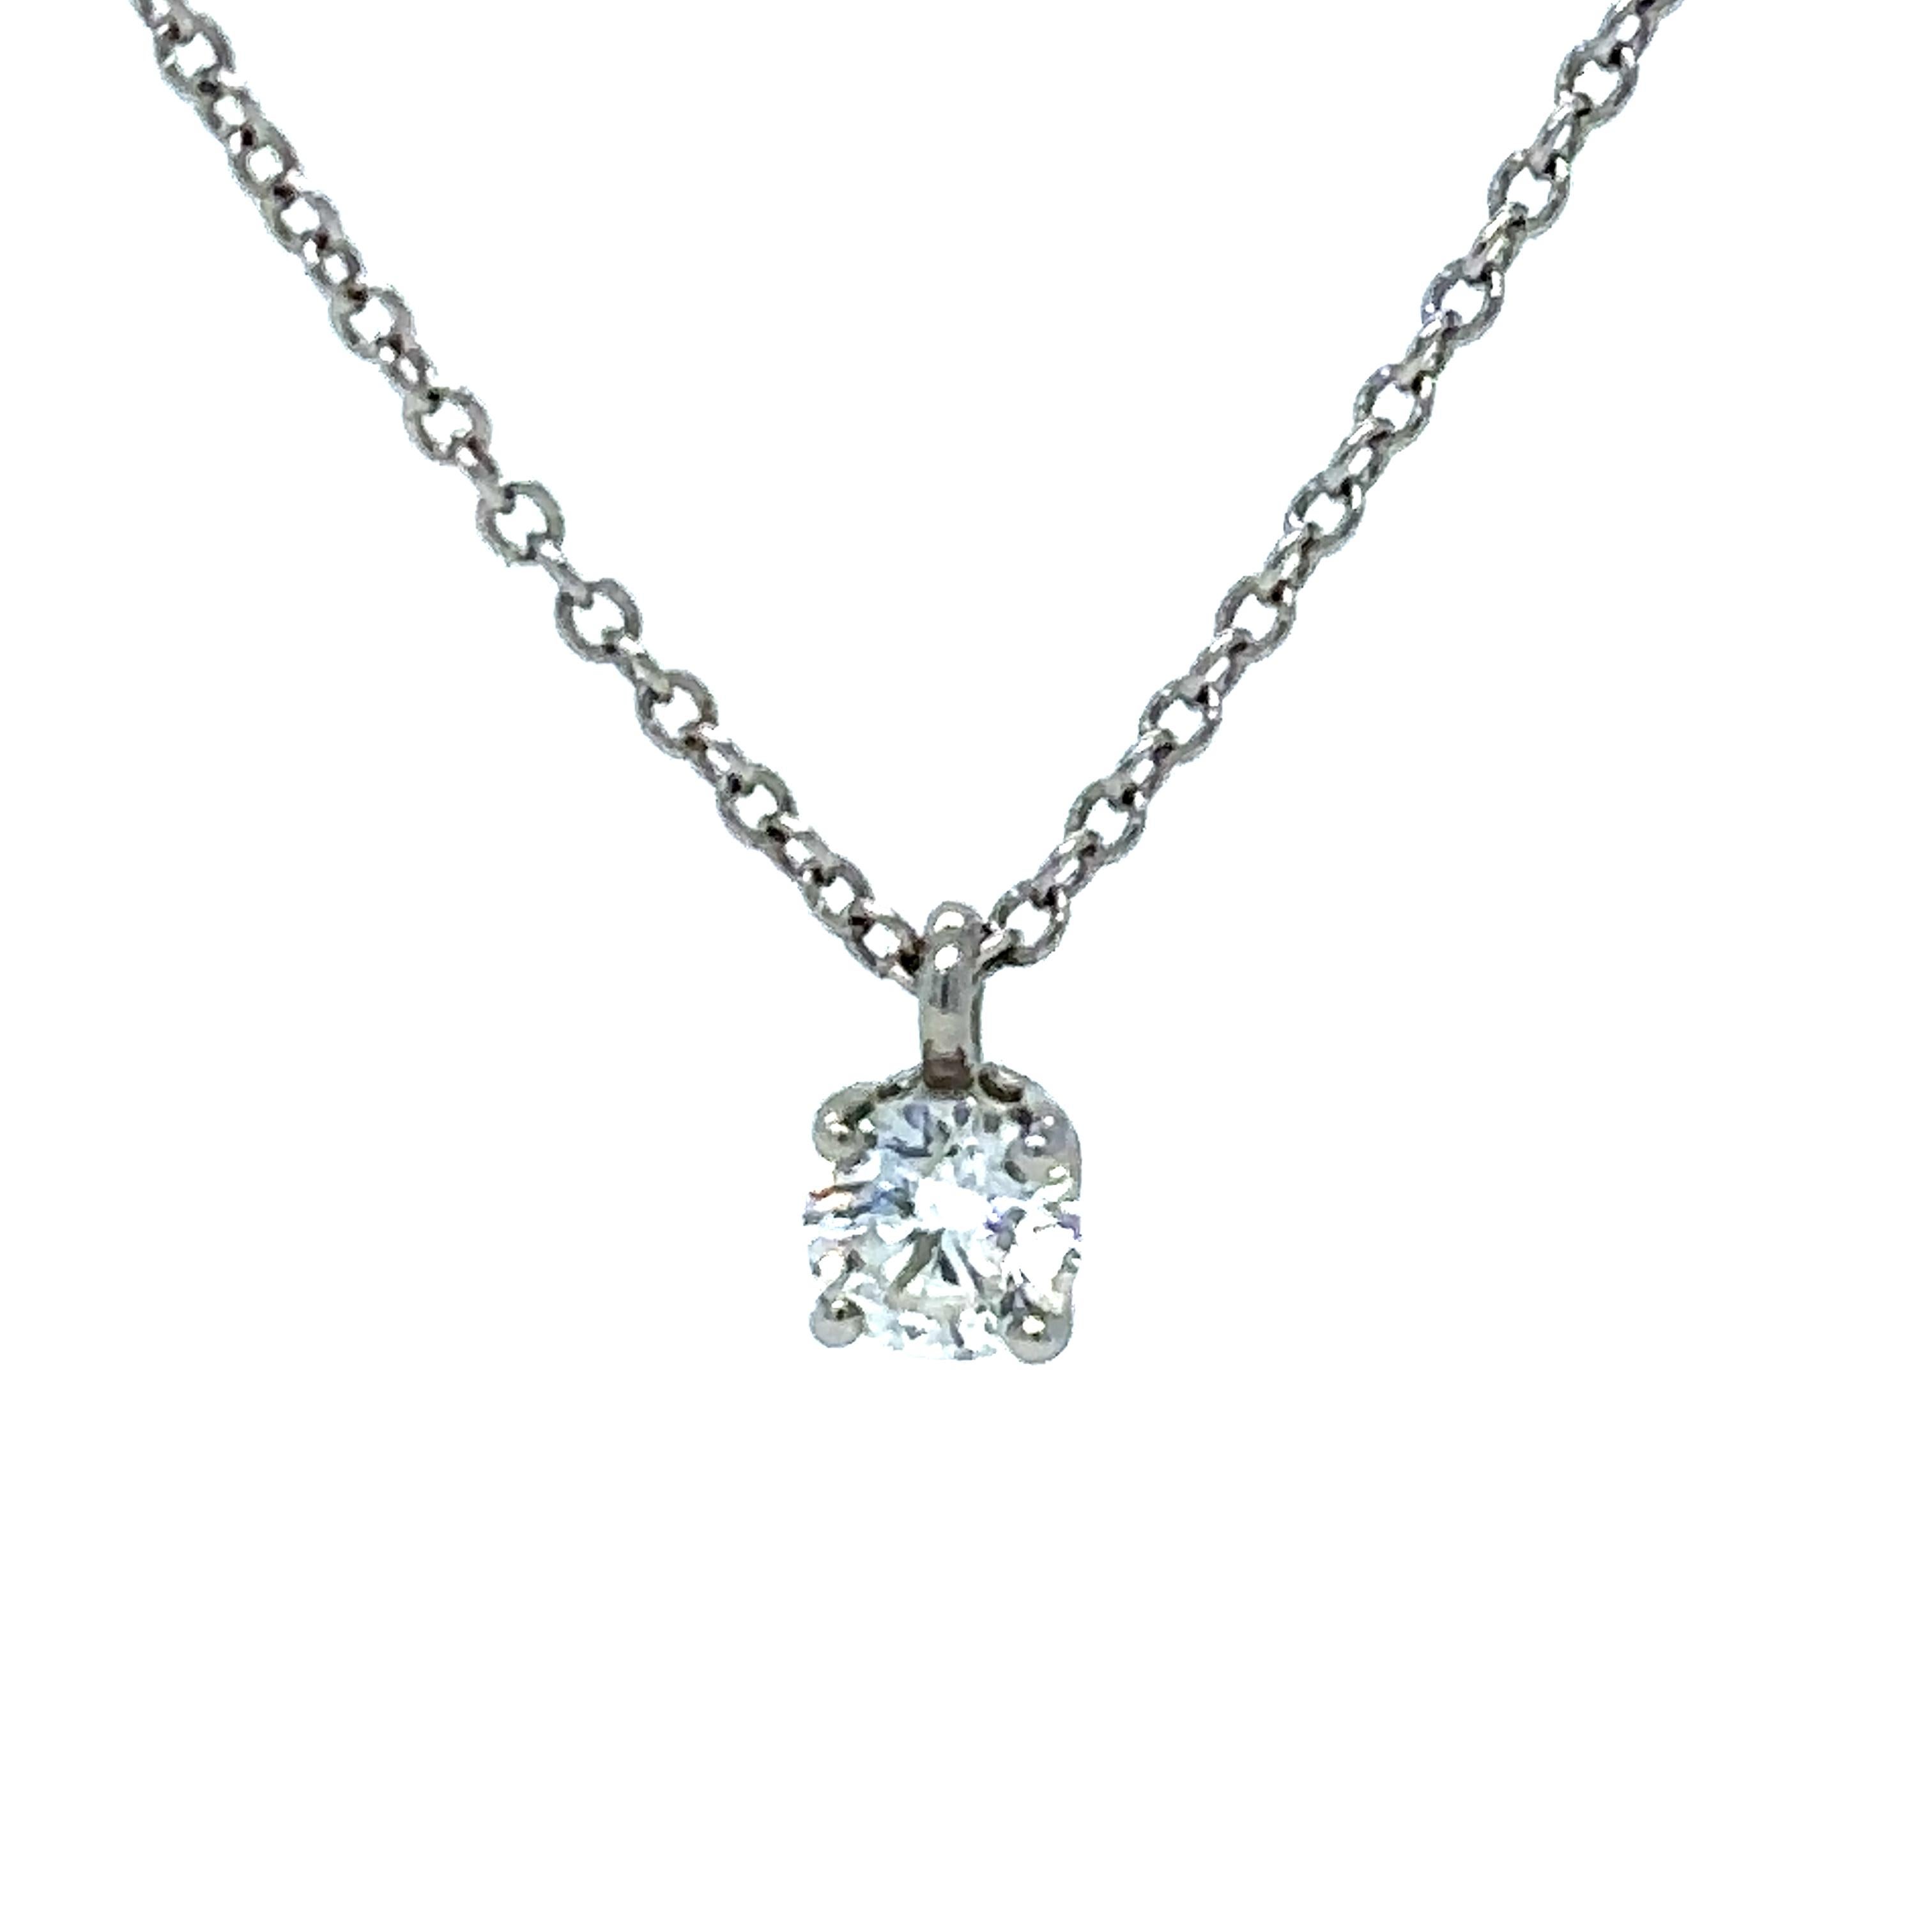 Tiffany and Co Solitaire Diamond Pendant in 18ct white gold with a round brilliant diamond. On a 16